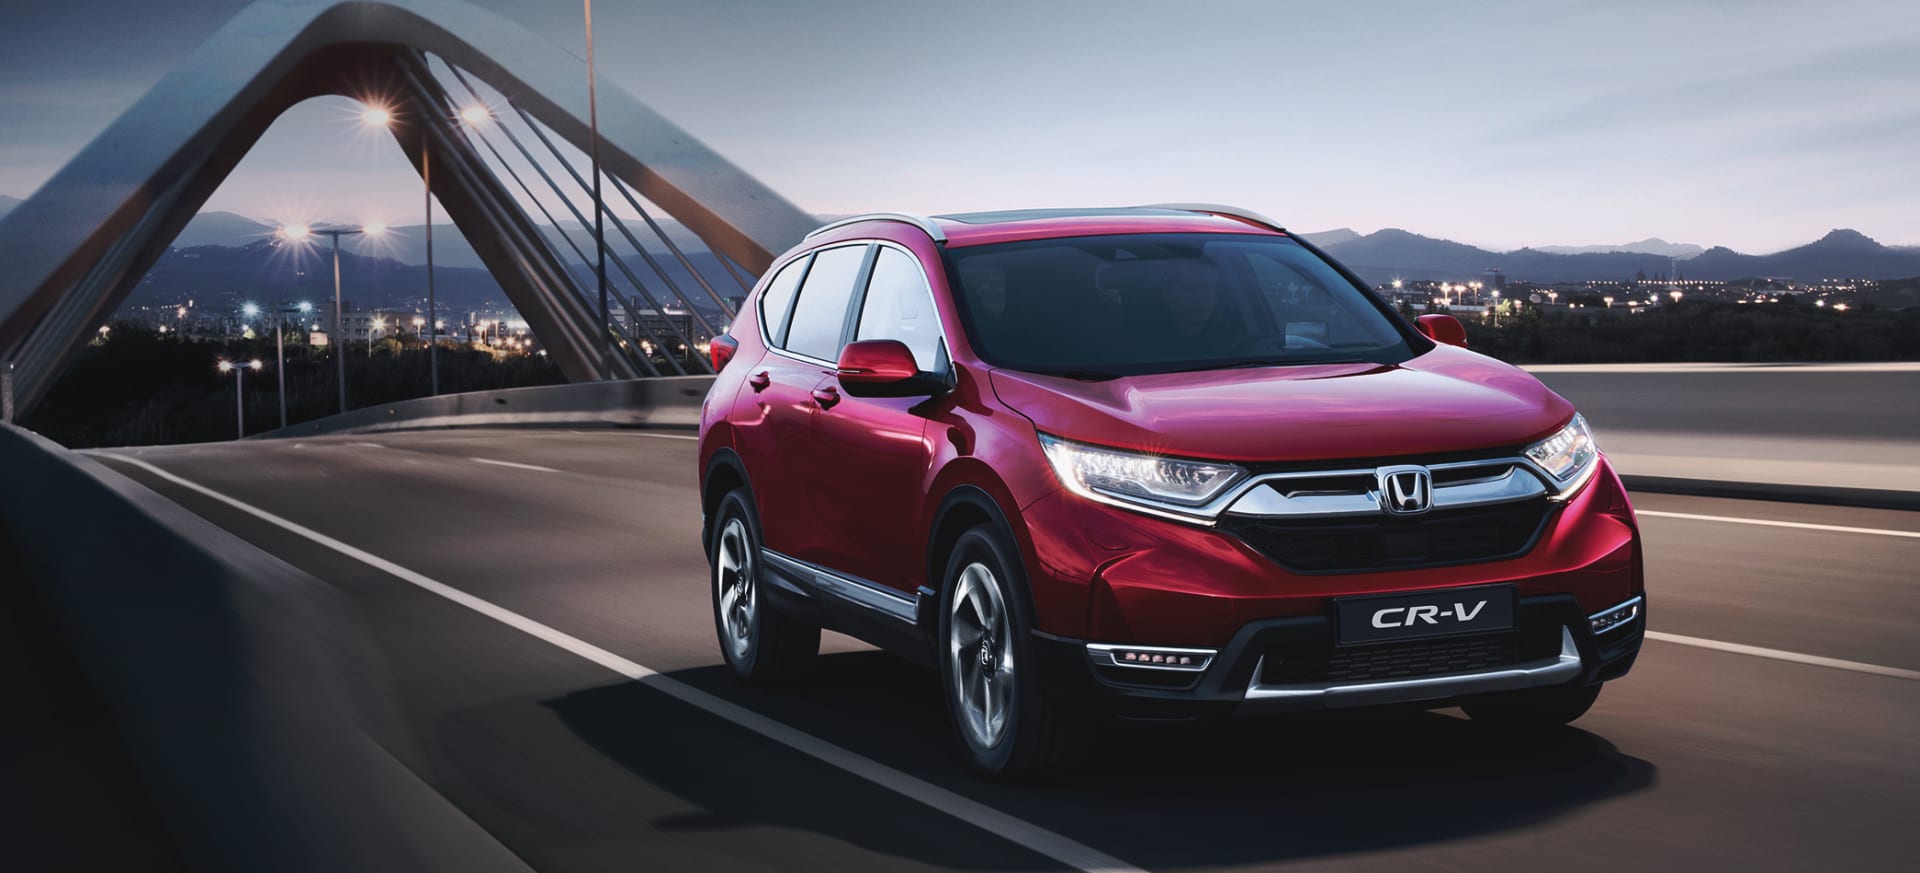 NEW CR-V AWD FROM ONLY £299 PM WITH £1500 DEPOSIT CONTRIBUTION